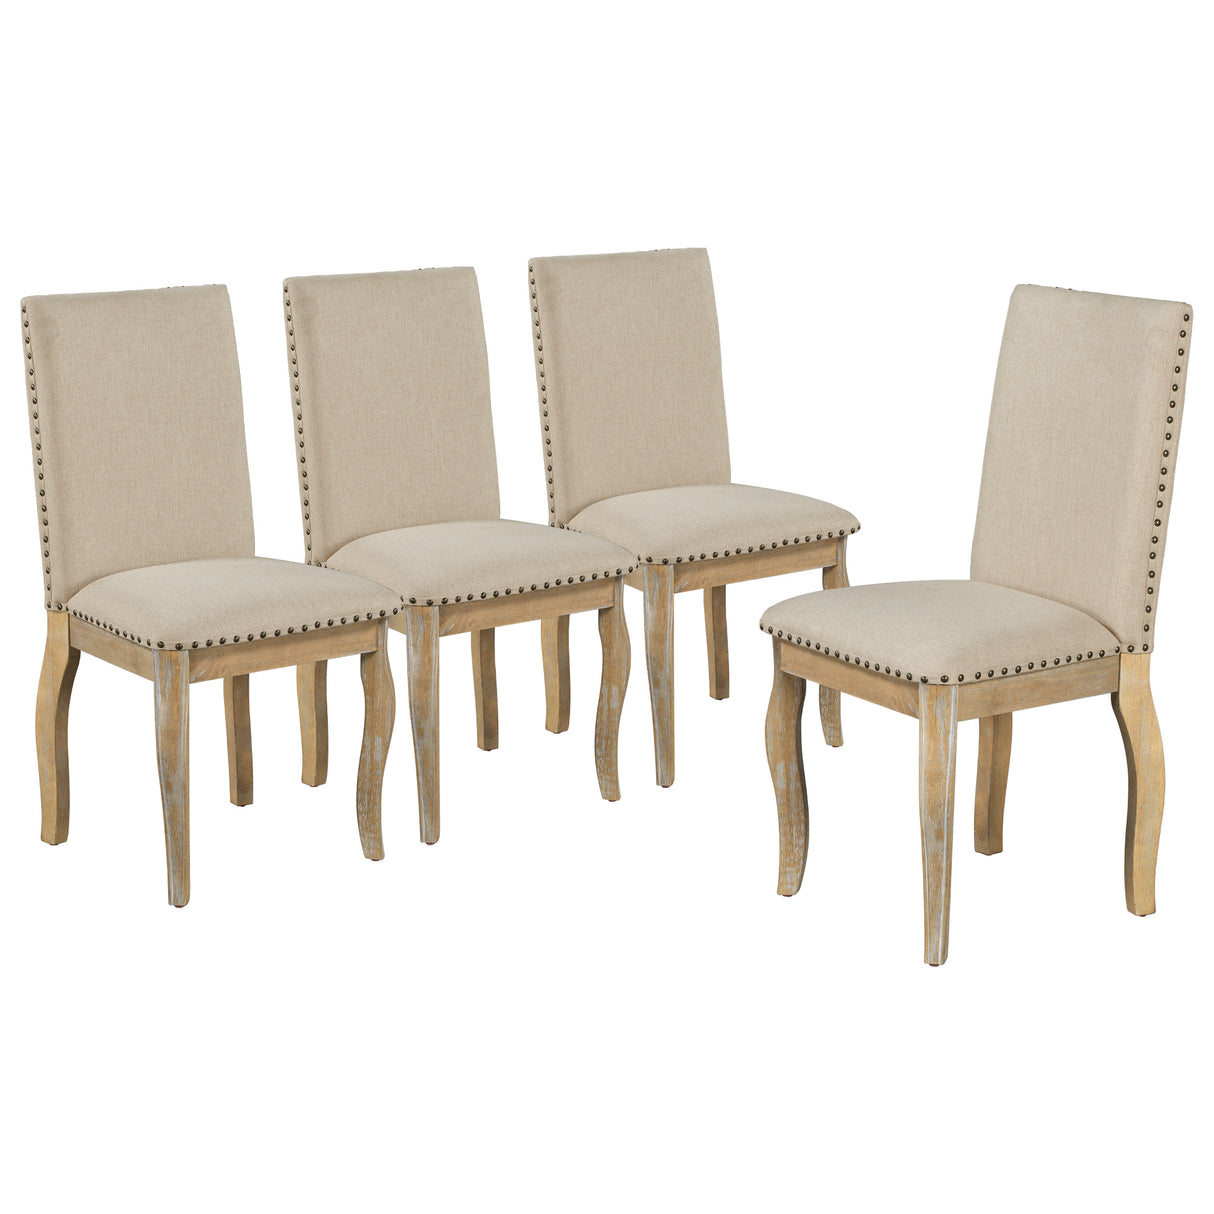 TREXM Set of 4 Dining chairs Wood Upholstered Fabirc Dining Room Chairs with Nailhead (Natural Wood Wash) - Home Elegance USA